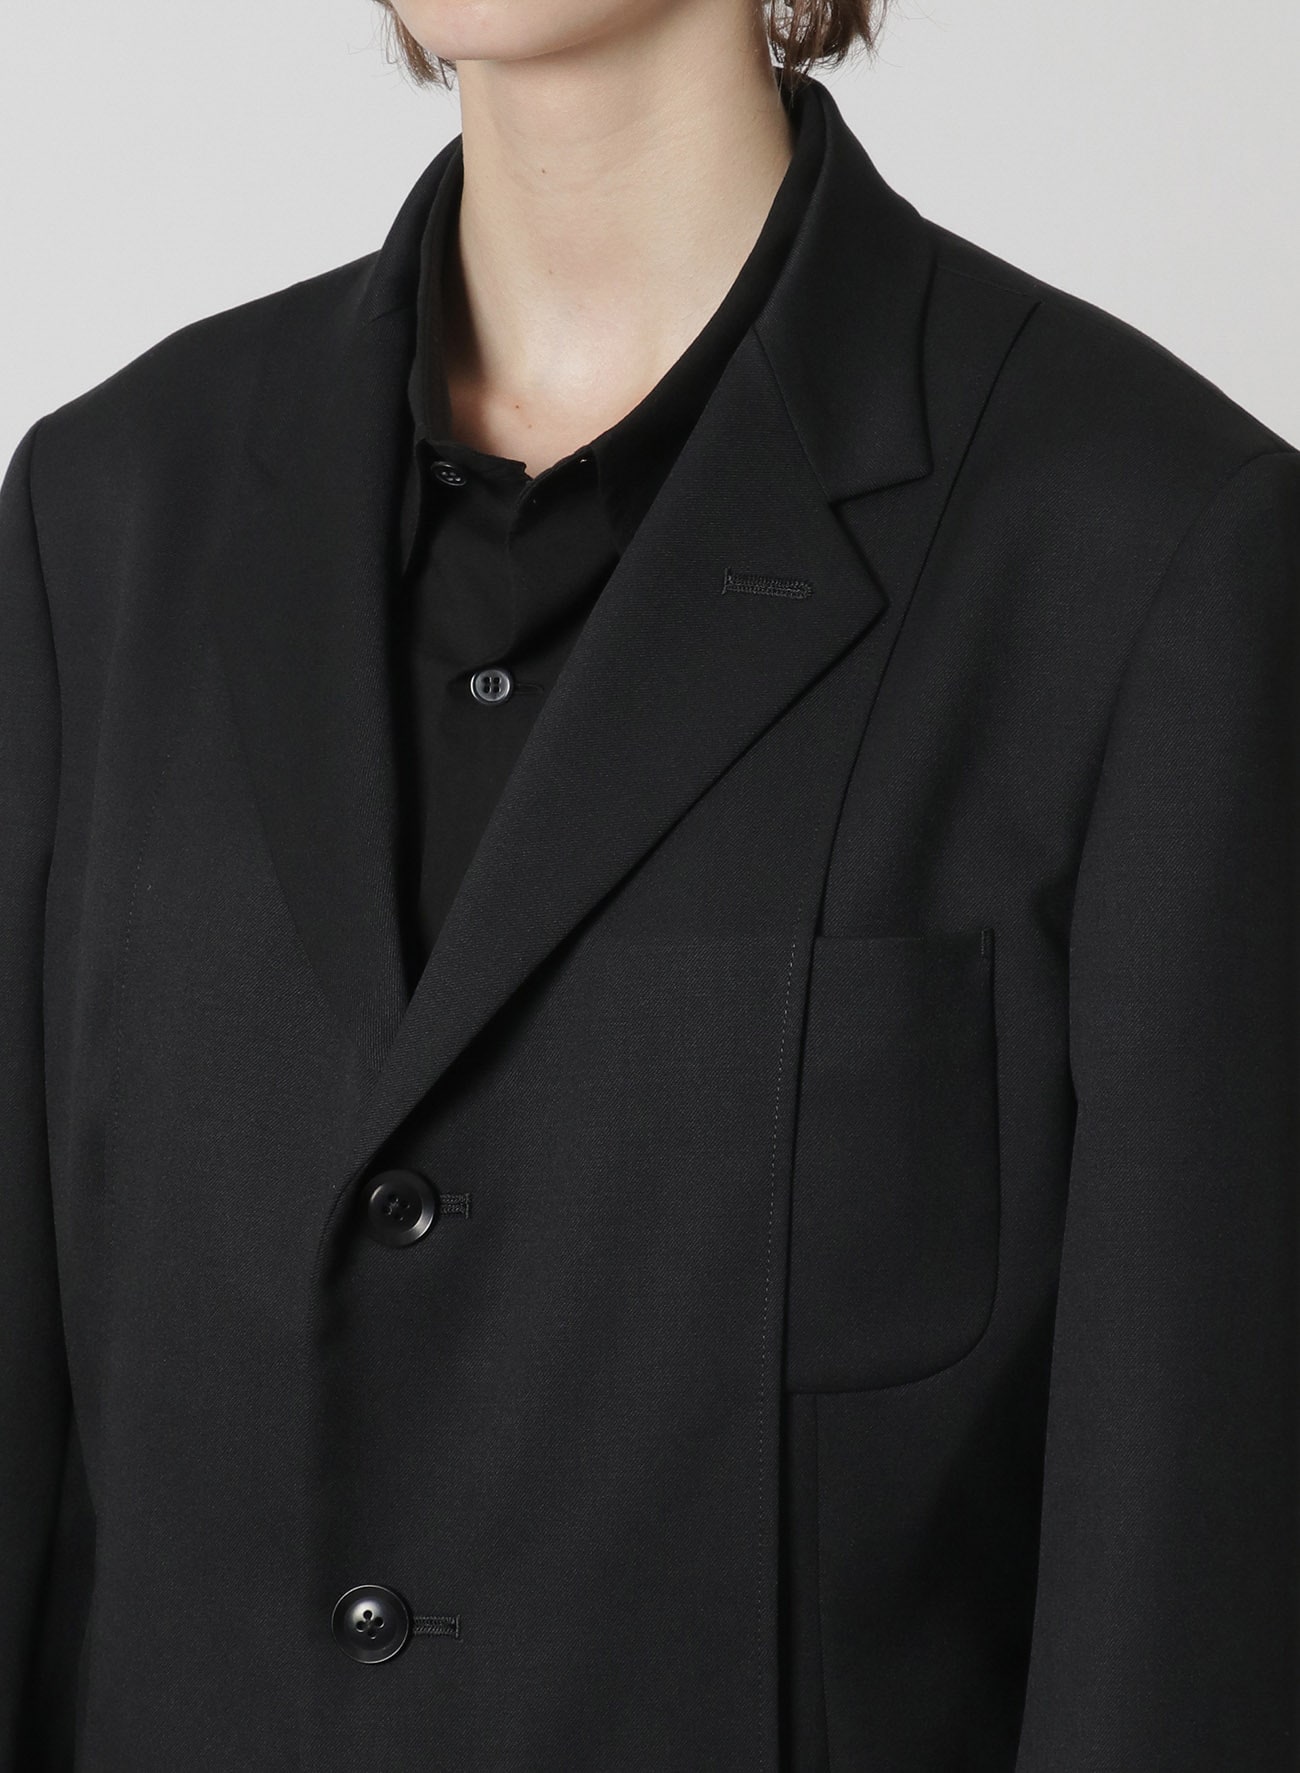 [Y's-Black Name] WOOL GABARDINE JACKET WITH ZIPPER DETAILS AND TRANSFORMING COLLAR